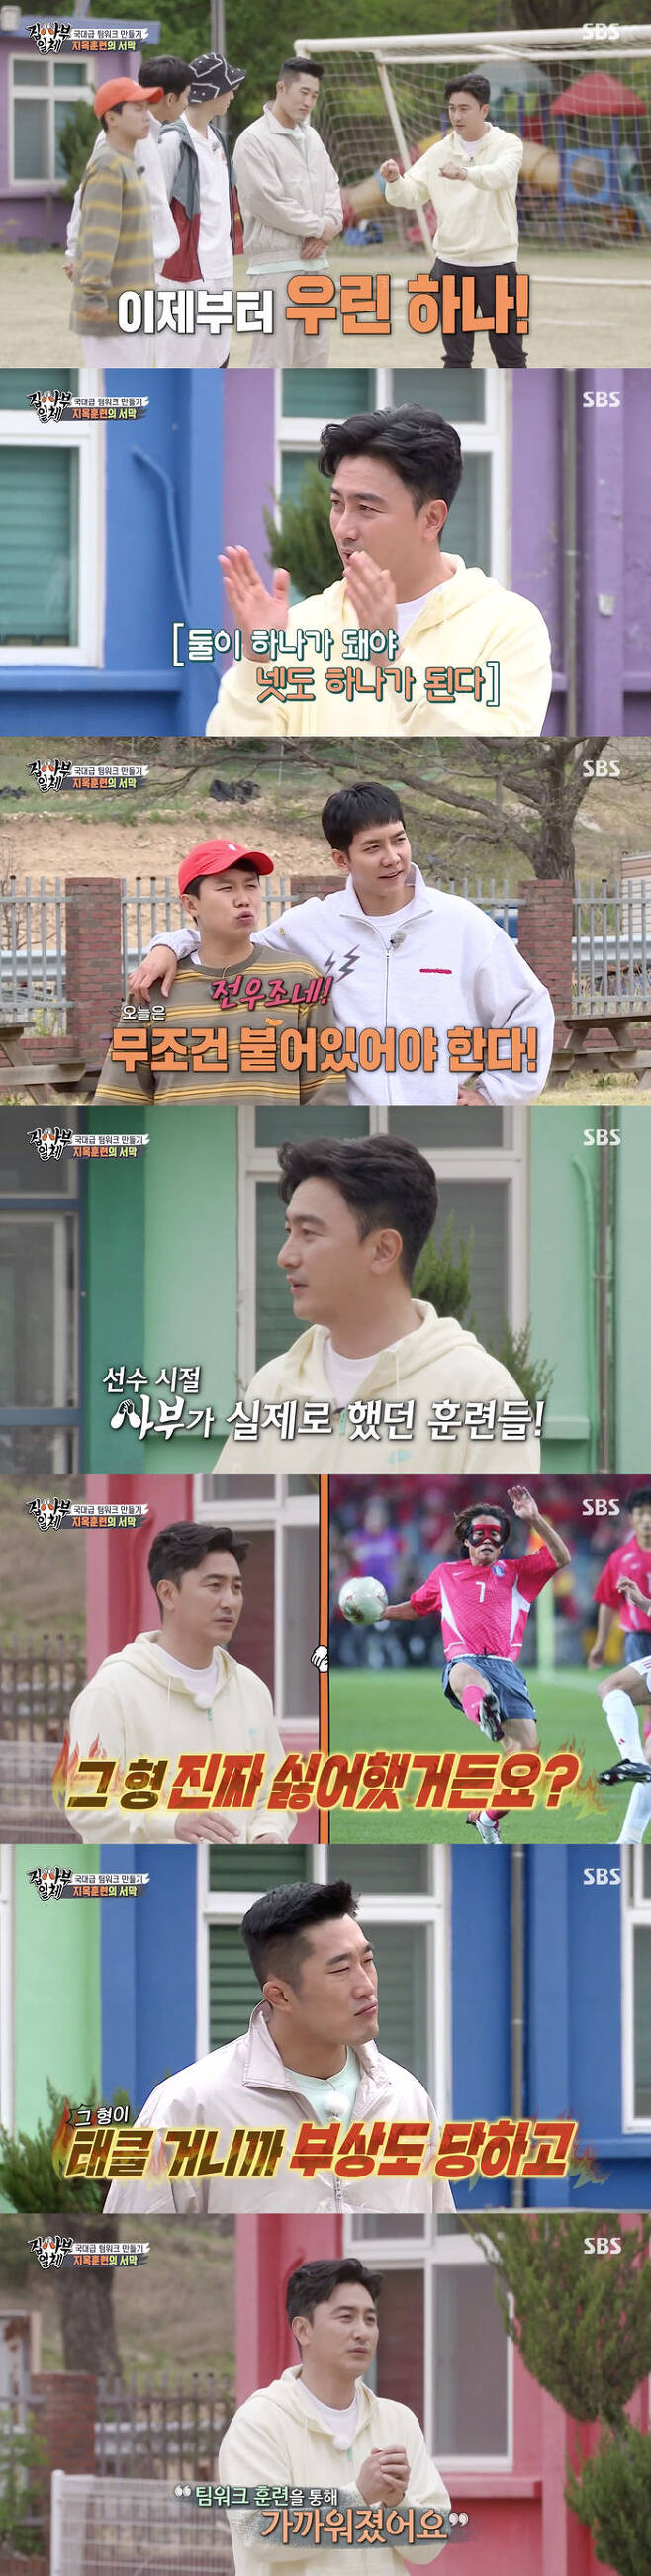 Ahn Jung-hwan has made Confessions about his experience as a player.On SBS All The Butlers broadcast on the 9th, Master Ahn Jung-hwan proposed training for All The Butlers members to create a national teamwork.On the show, Master Ahn Jung-hwan said, The first step is a group of two. When you do all the actions, you have to stay unconditional today.Two are one, he said, emphasizing that the two should be one and the four can be one.And he said, I have done all the training today. He said, I know Taiei Kin.I really hated that brother, he said, referring to Taiei Kin, who played as a national representative.Ahn Jung-hwan said: In the professional team, he was an opponent defender and striker, and his brother really tackled me so much that I was hurt so much, so I hated it so much.I did not want to see Mug shot. He said, But I was selected as a national representative and my goal was one, so I got closer and teamwork through training. 